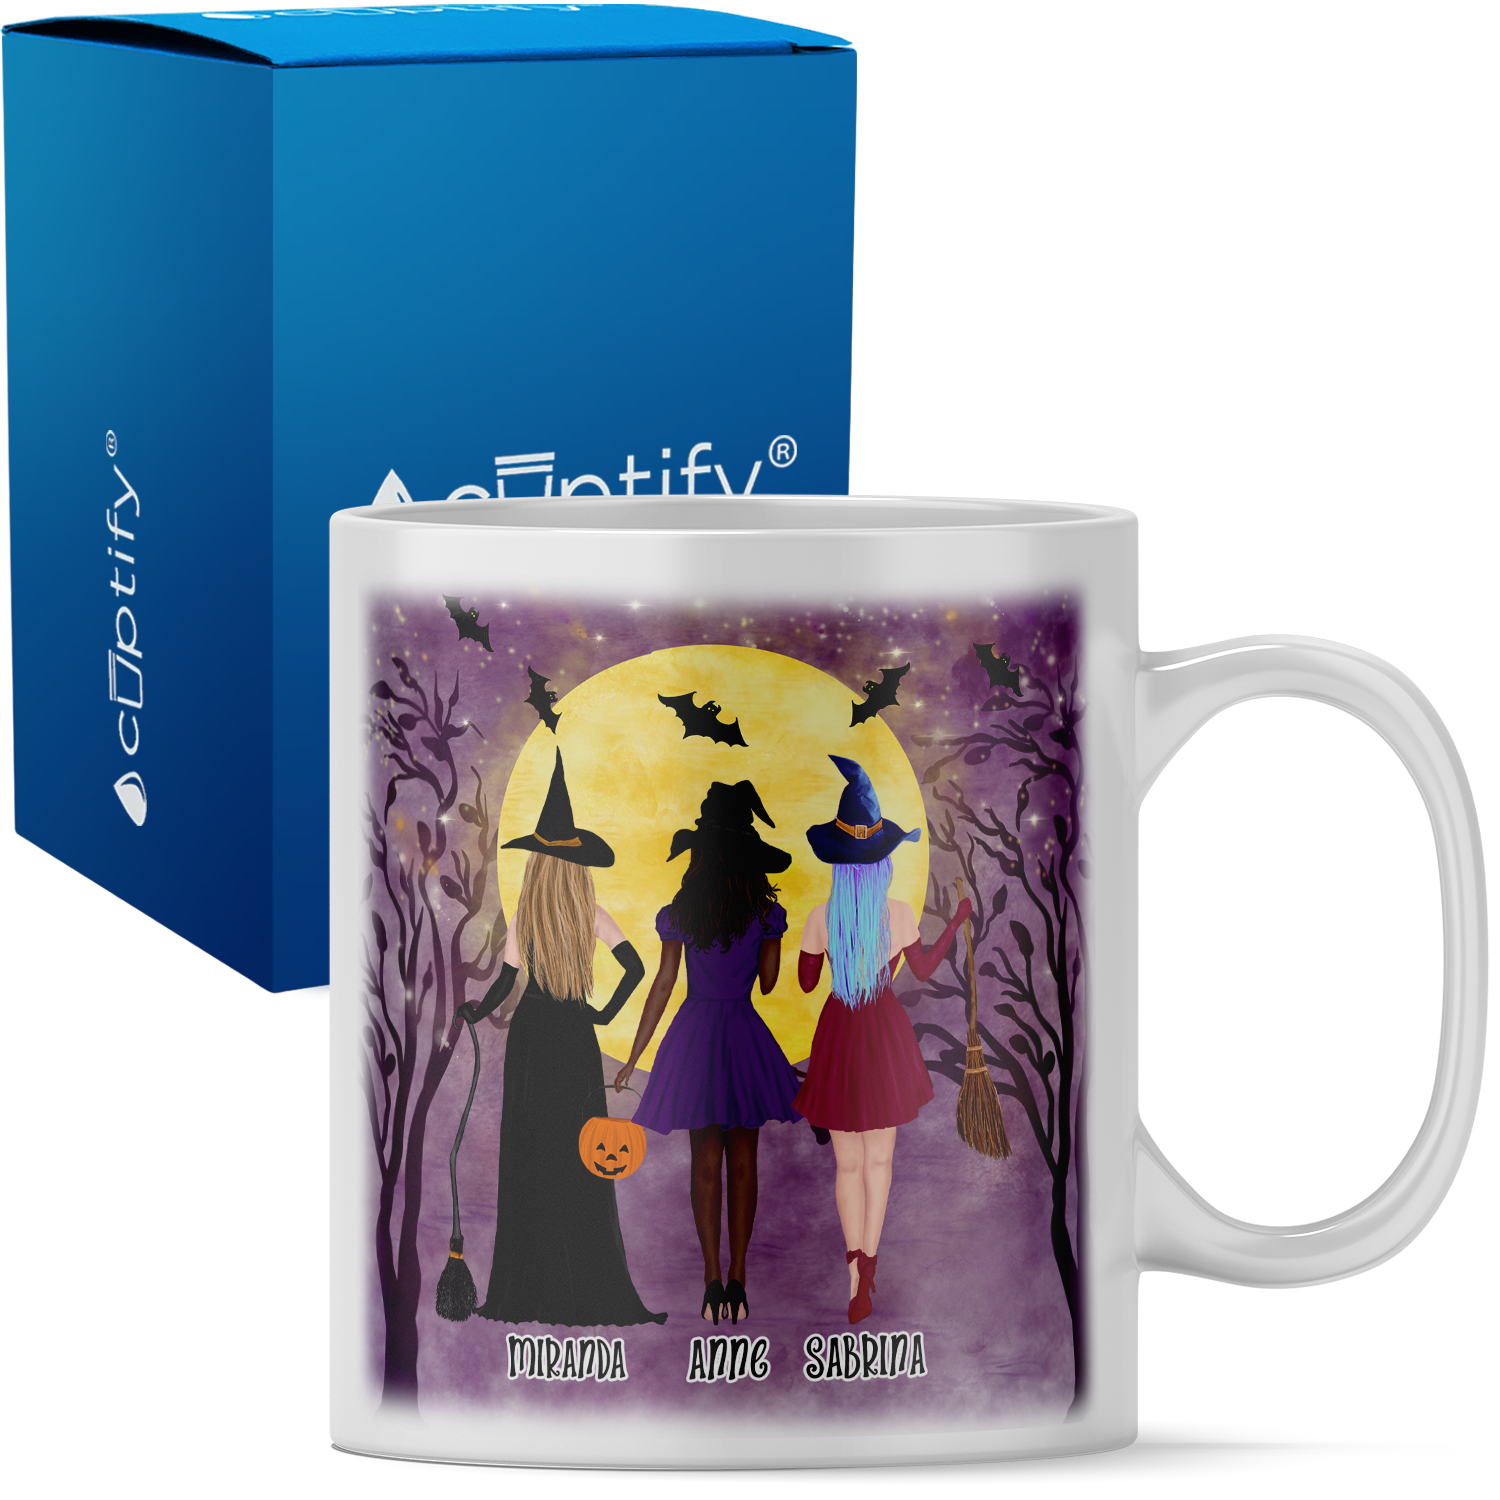 Personalized Best Witches on 11oz Ceramic White Coffee Mug